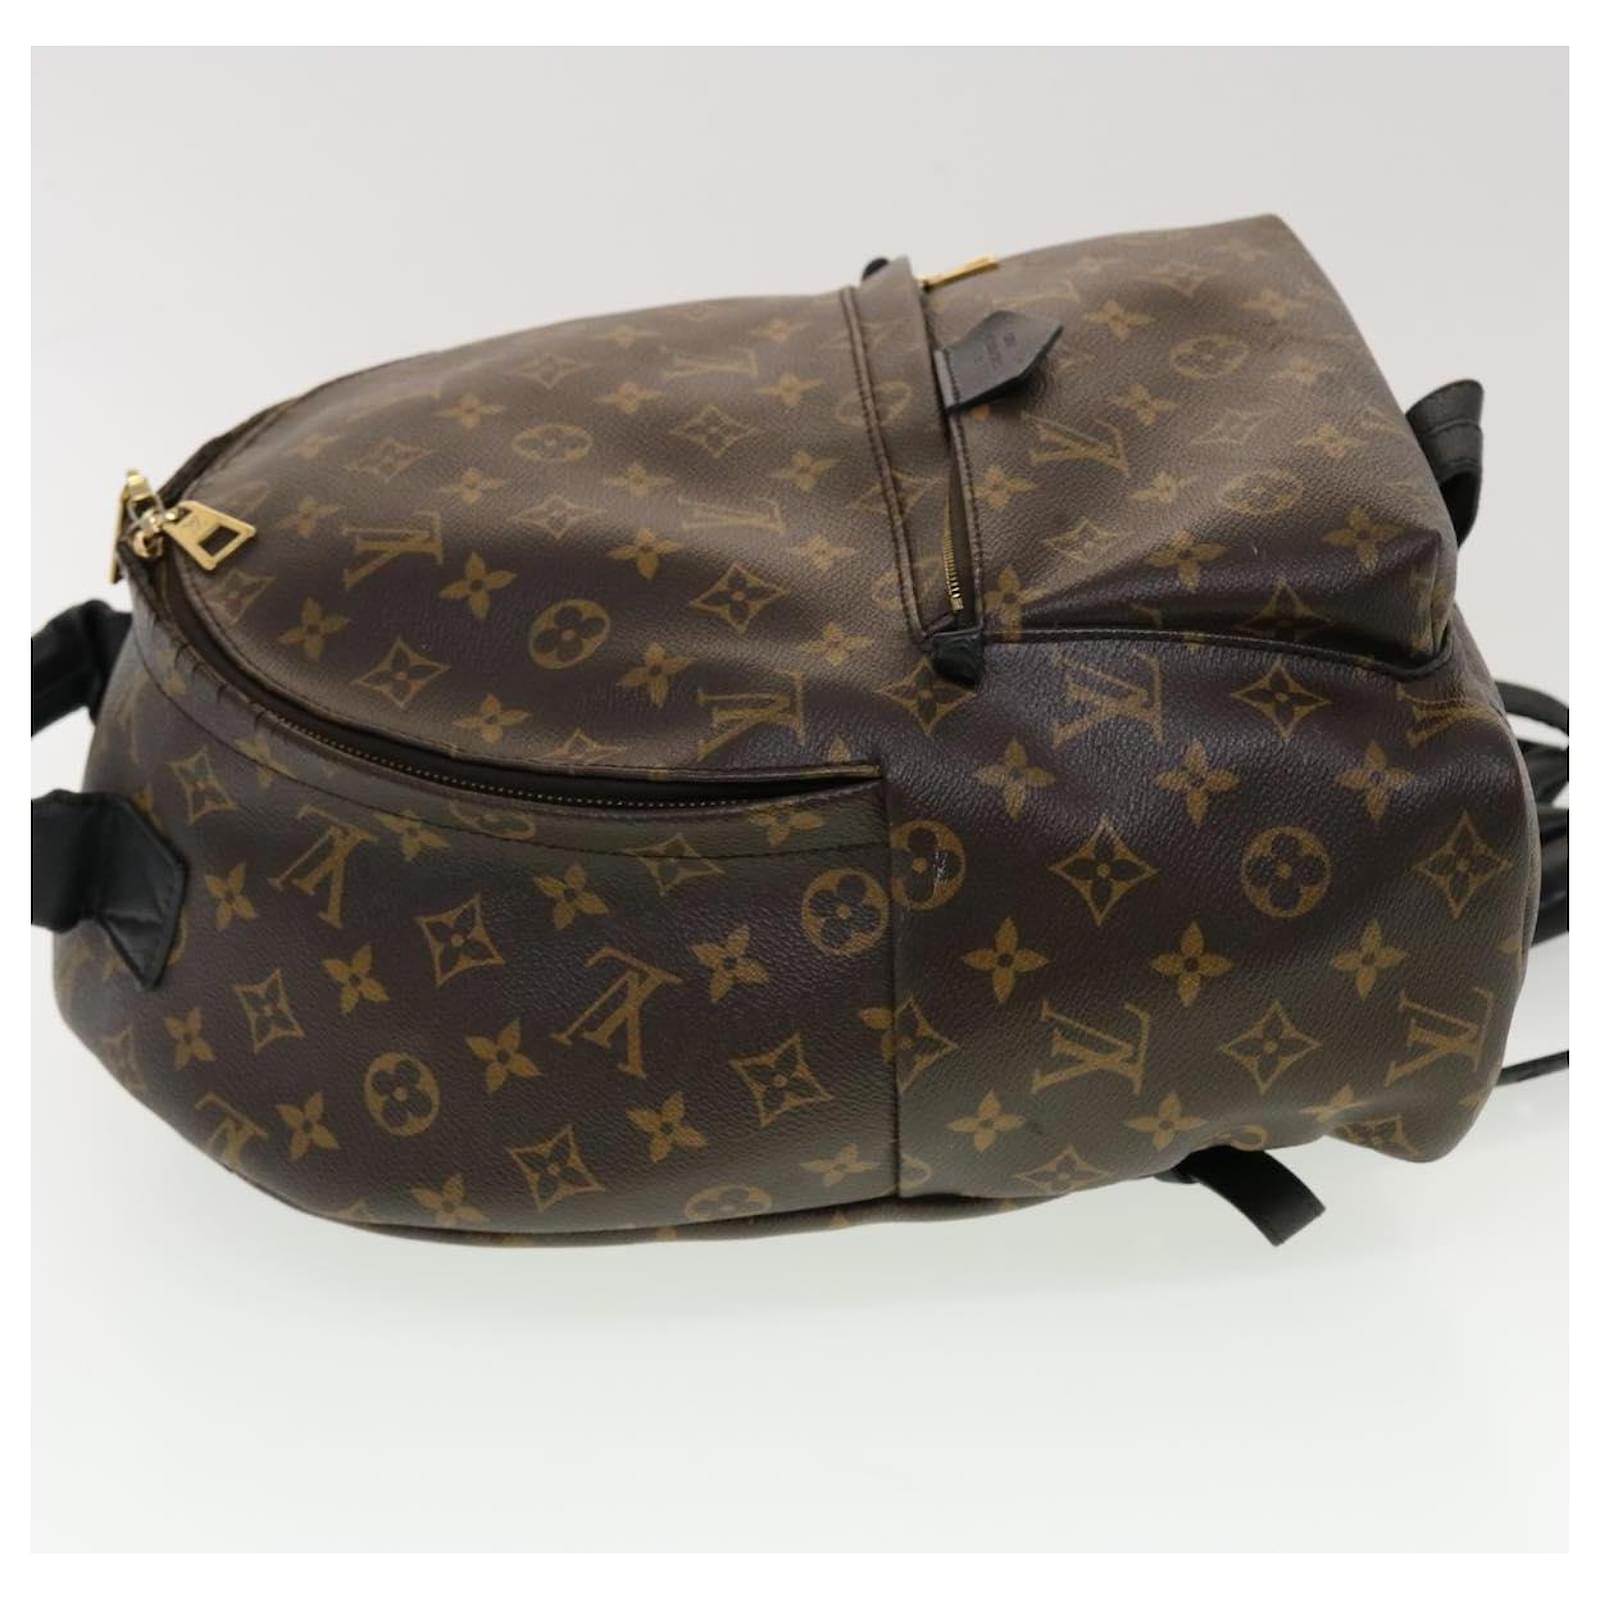 Louis Vuitton NEW M44874 Monogram Palm Springs MM Backpack